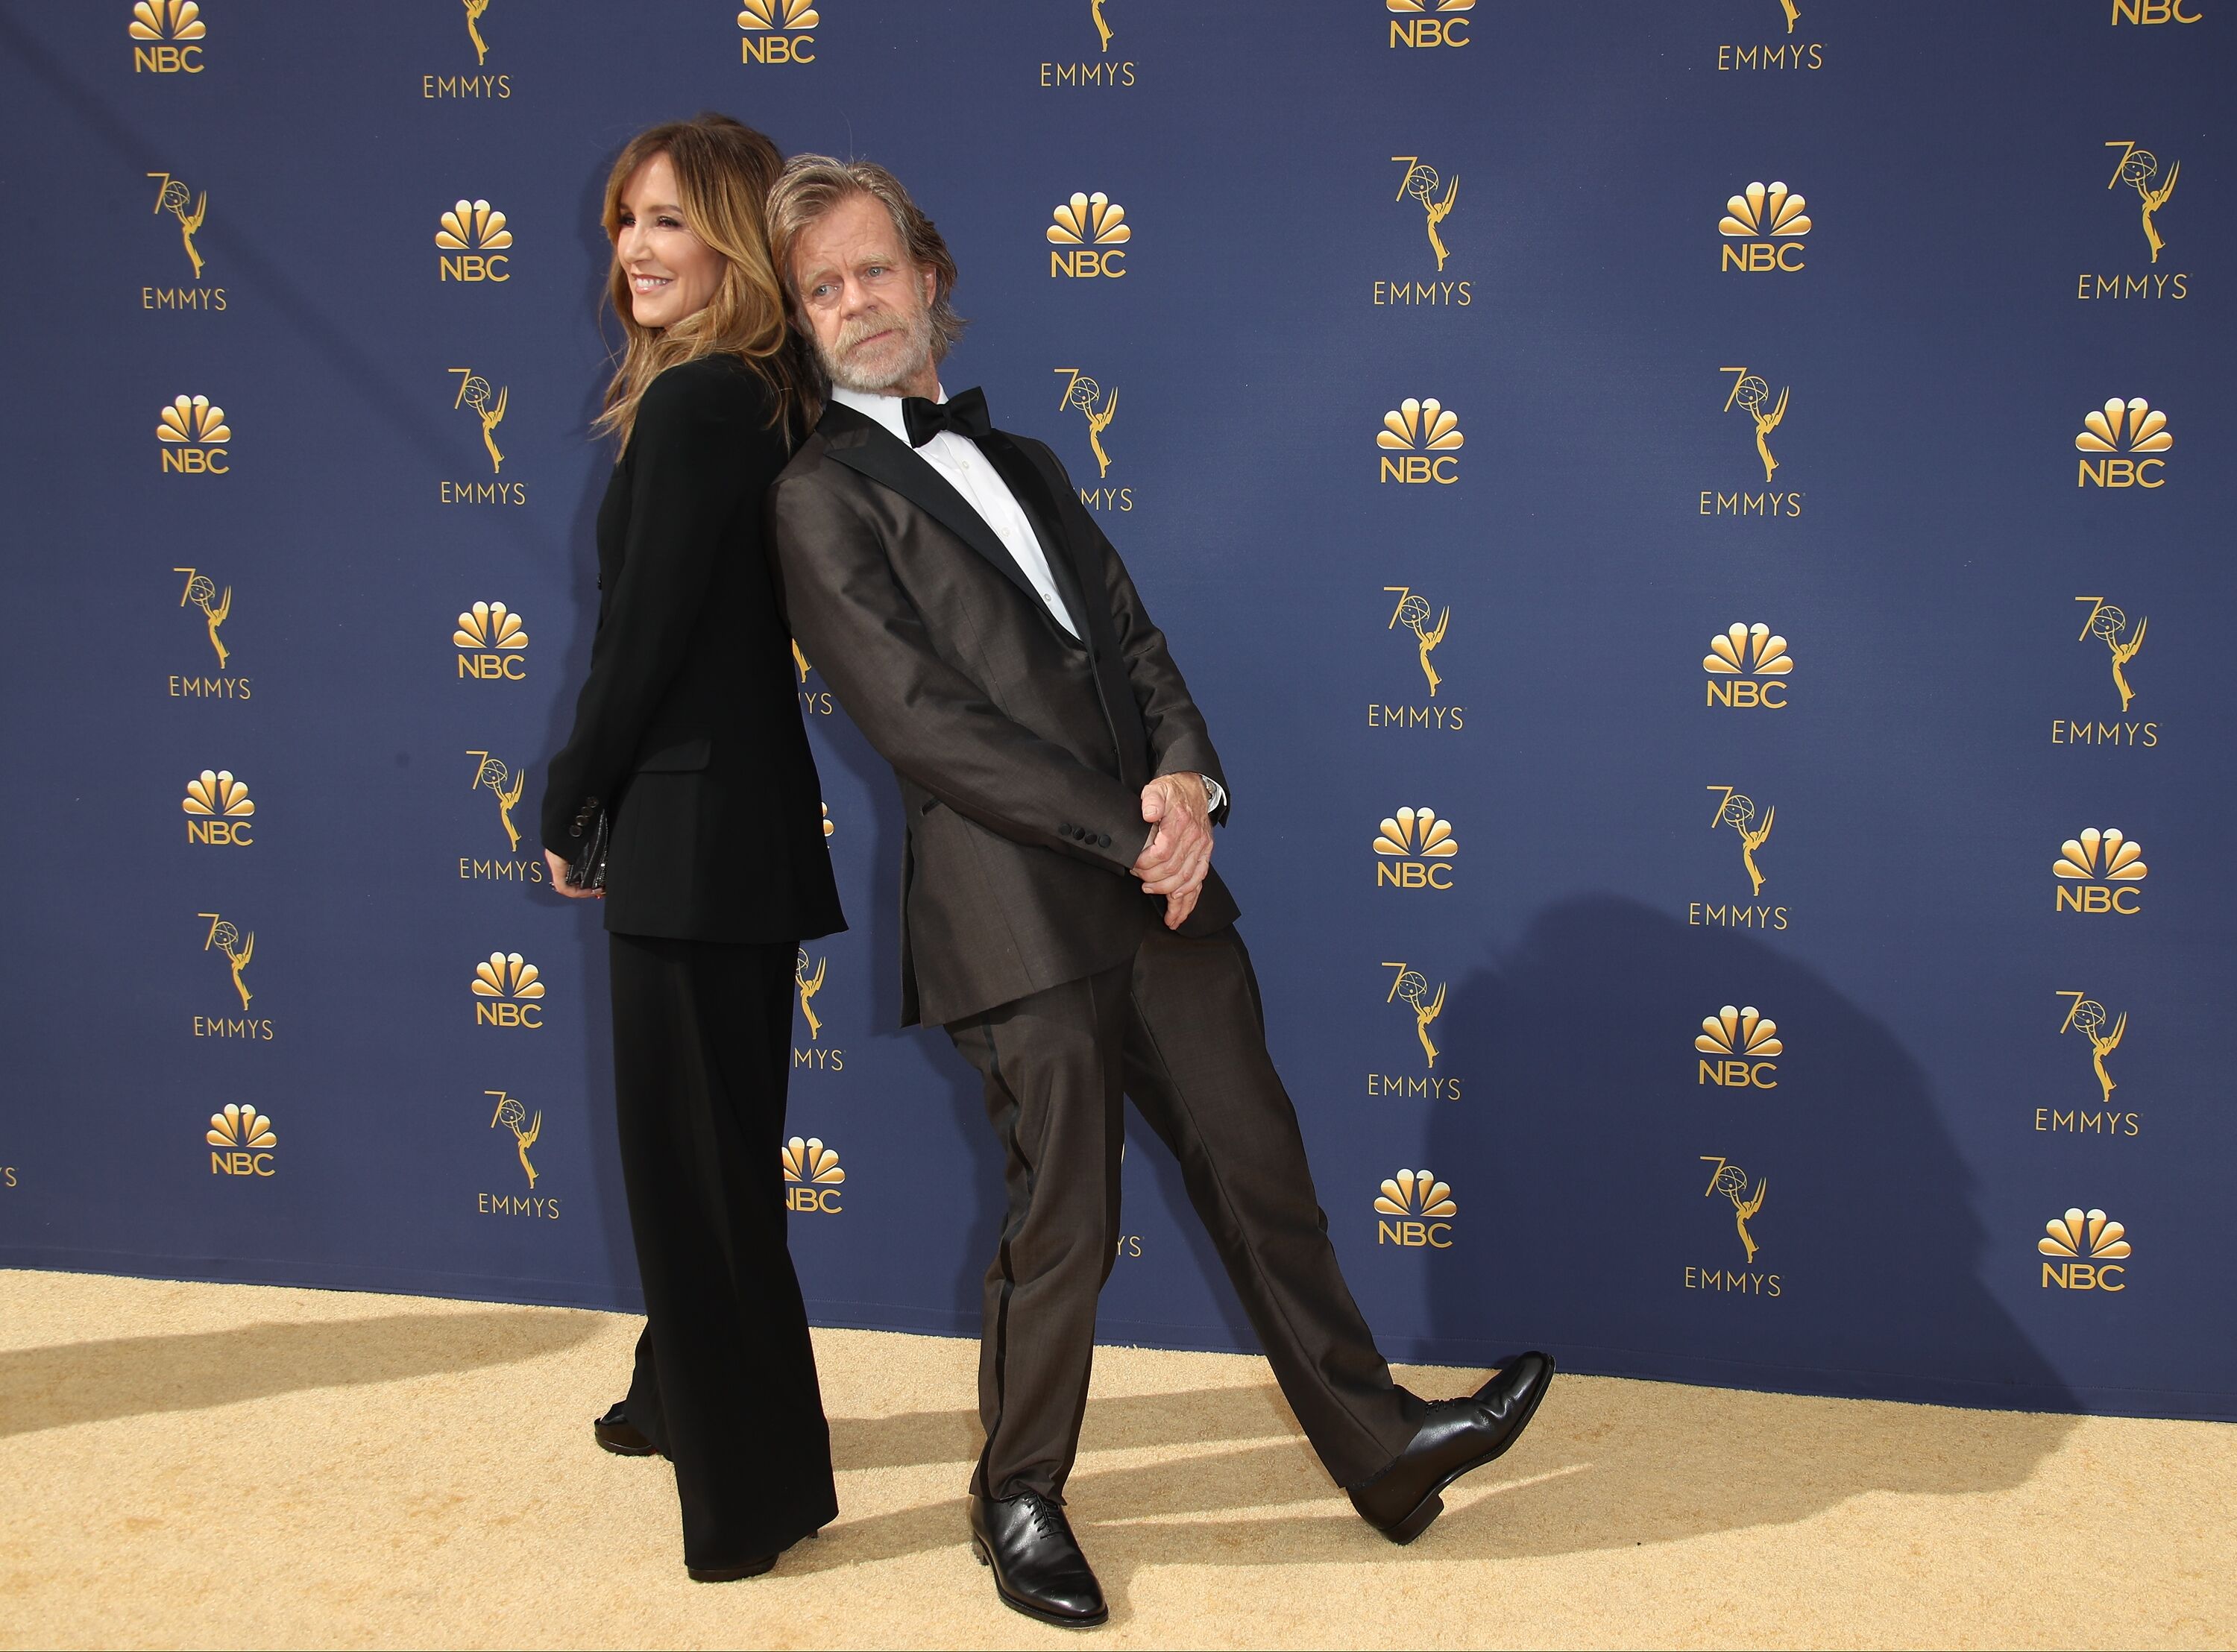 Felicity Huffman and William H. Macy attend the 70th Emmy Awards at Microsoft Theater on September 17, 2018 | Photo: Getty Images